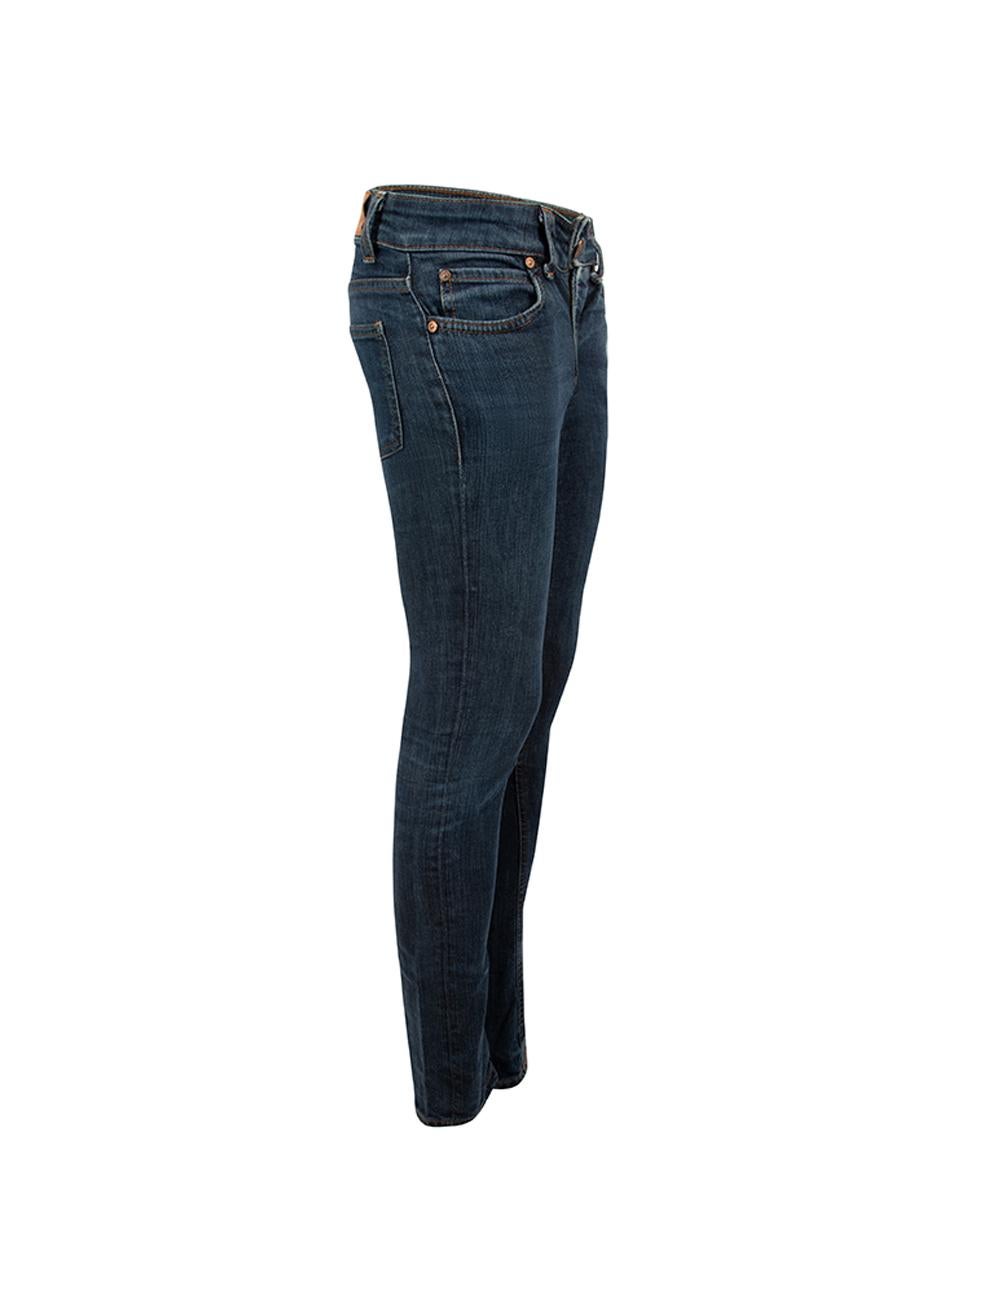 CONDITION is Very good. Minimal wear to jeans is evident. Minimal wear to the interior of the jeans where stains can be seen on this used Acne Jeans designer resale item. 
 
 Details
  Blue
 Denim
 Straight leg jeans
 Low rise
 Regular length
 Front